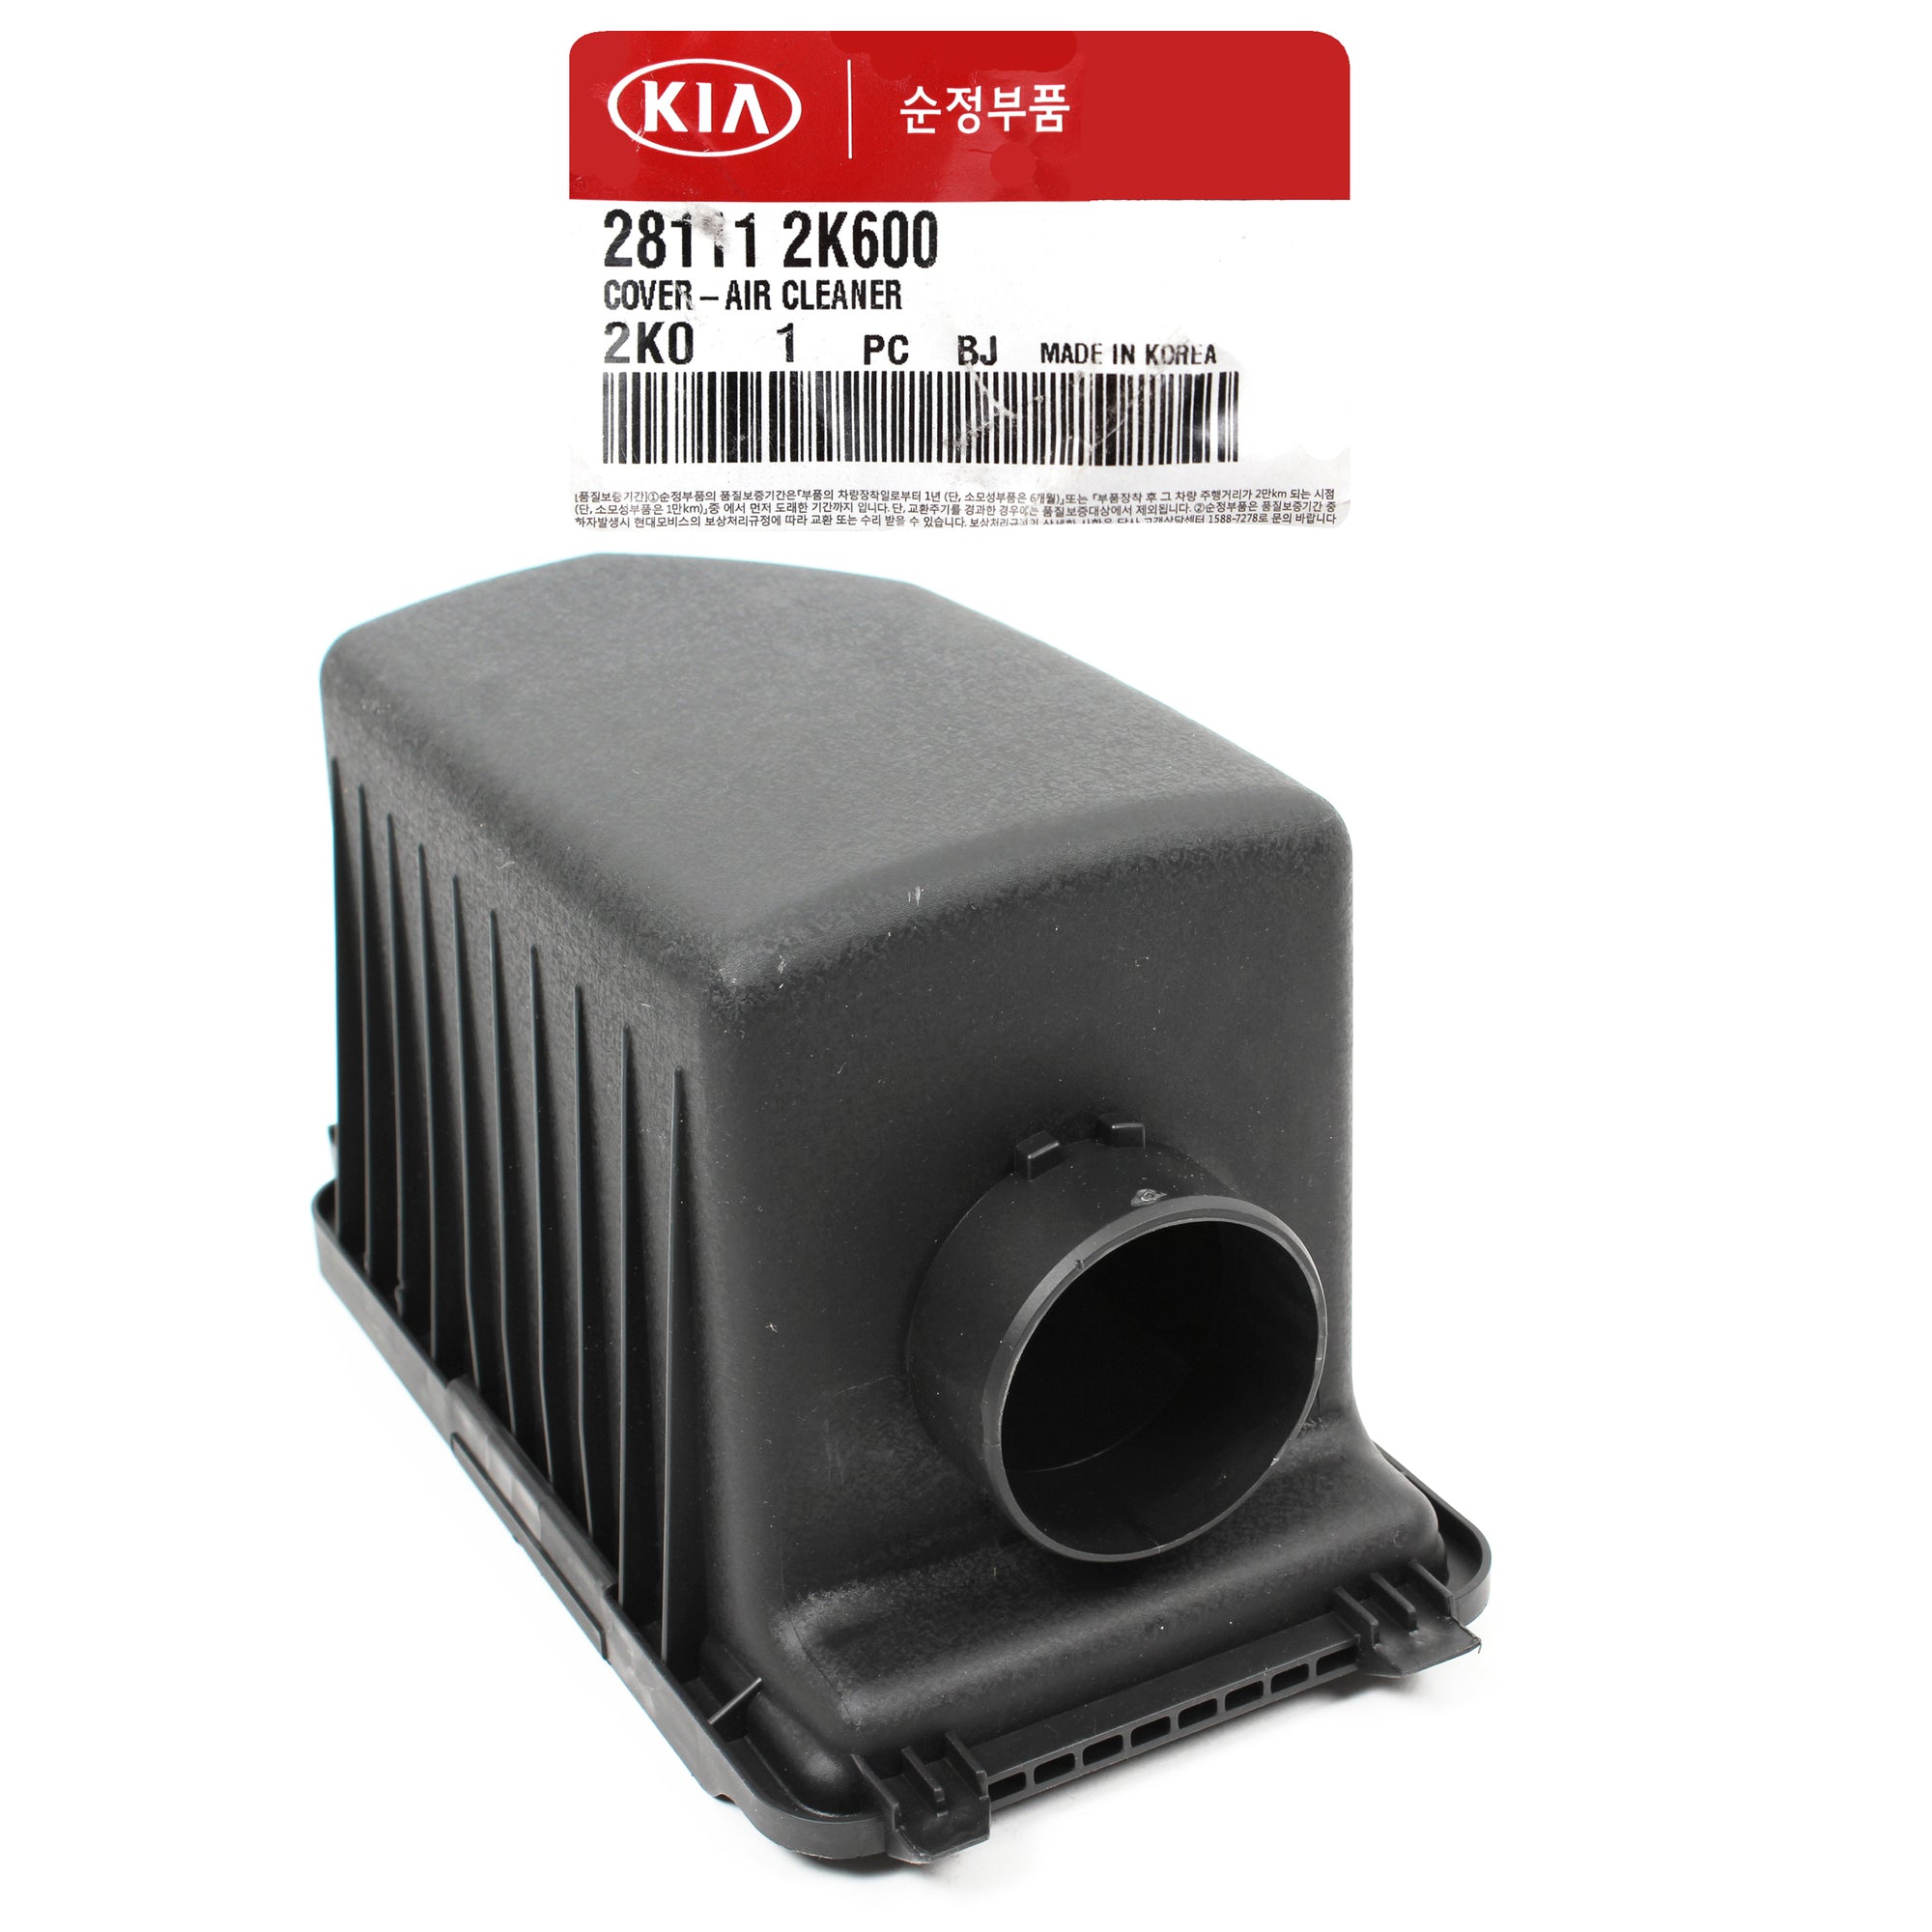 GENUINE Air Cleaner Cover for 2012 2013 Kia Soul 281112K600